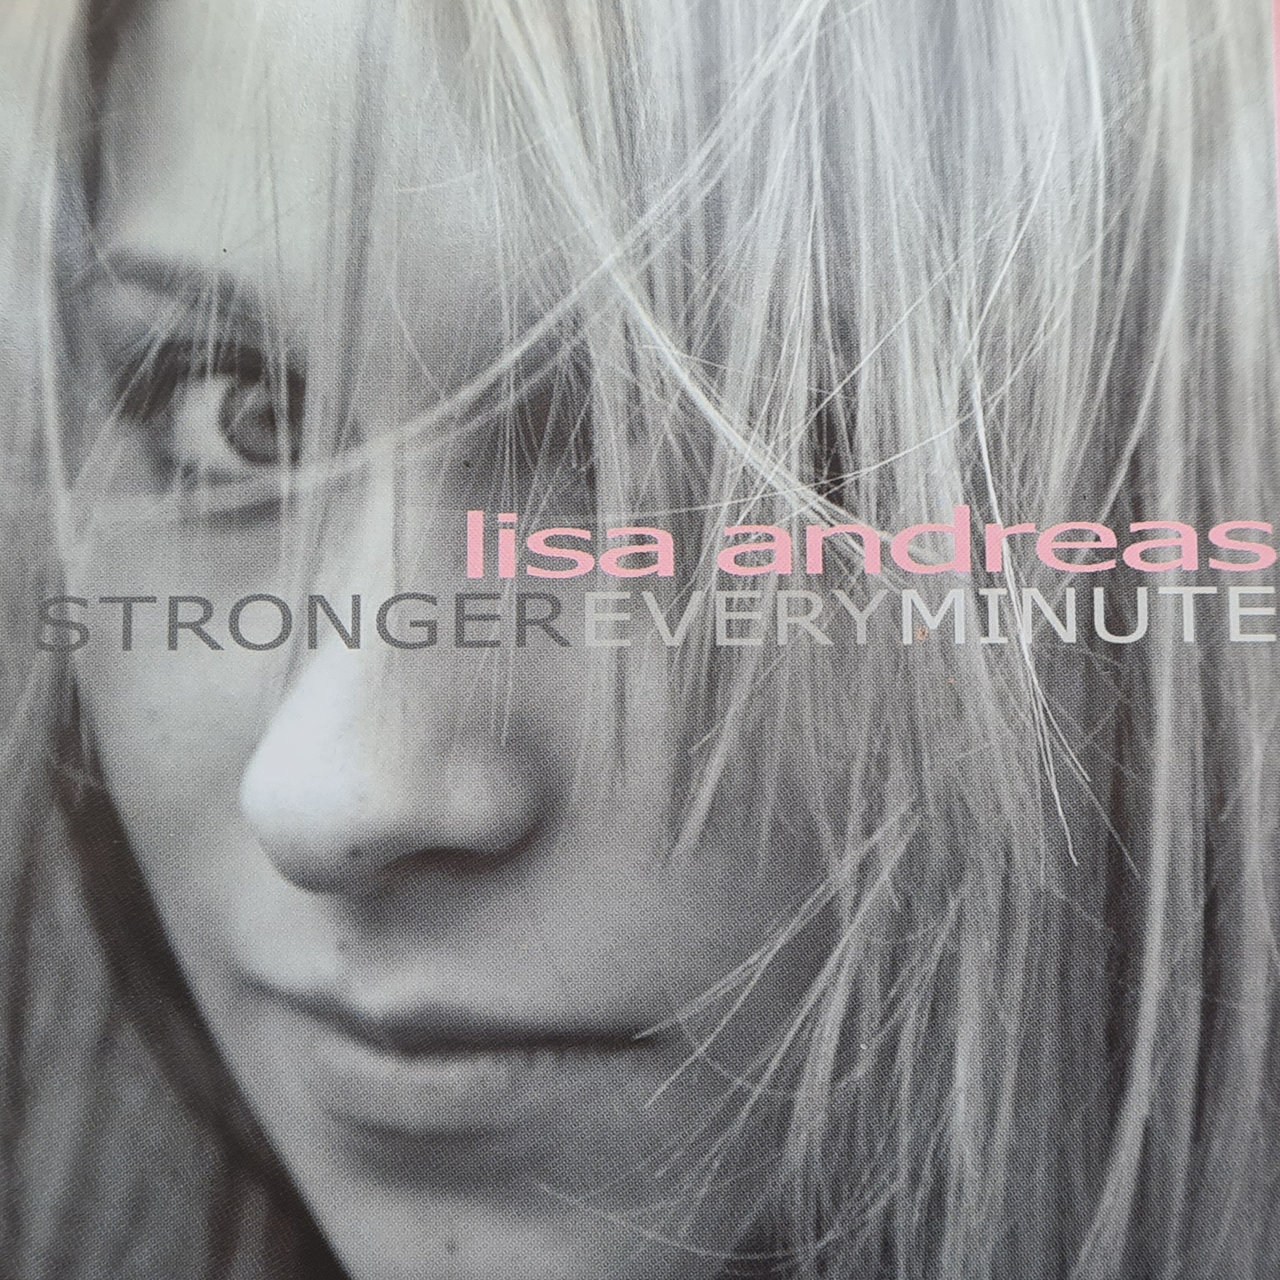 Lisa Andreas Stronger Every Minute cover artwork